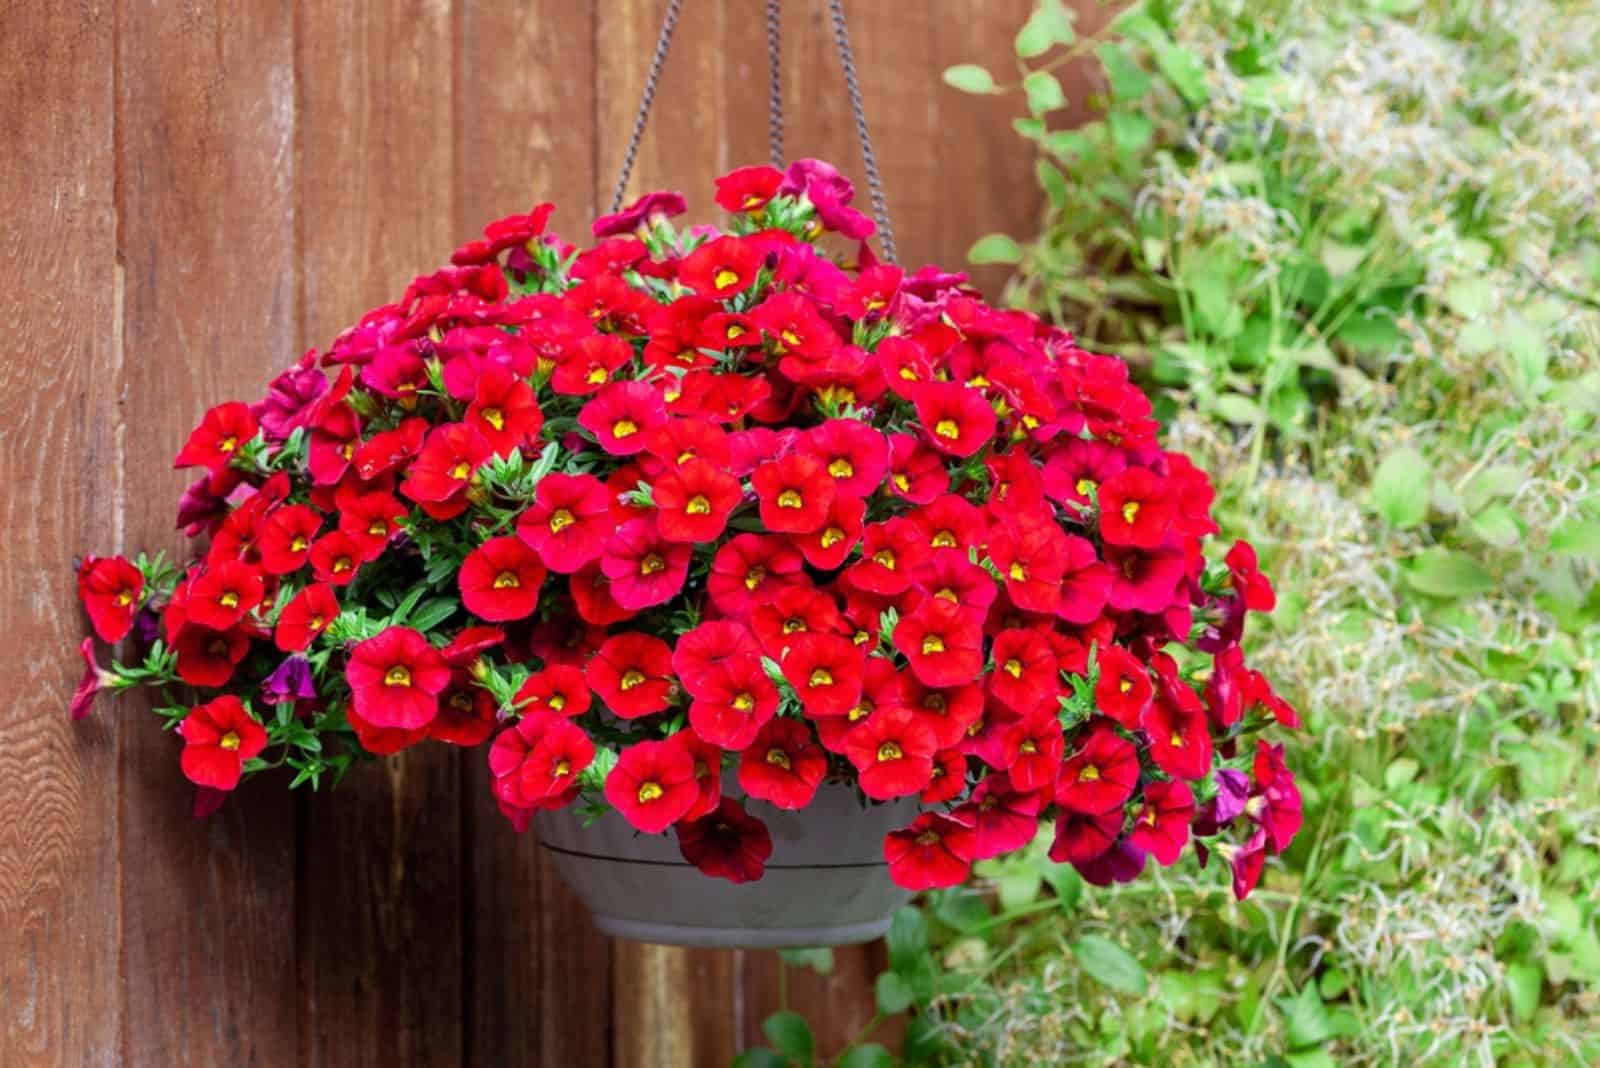 Pot of bright red petunia flowers hanging on a wooden wall